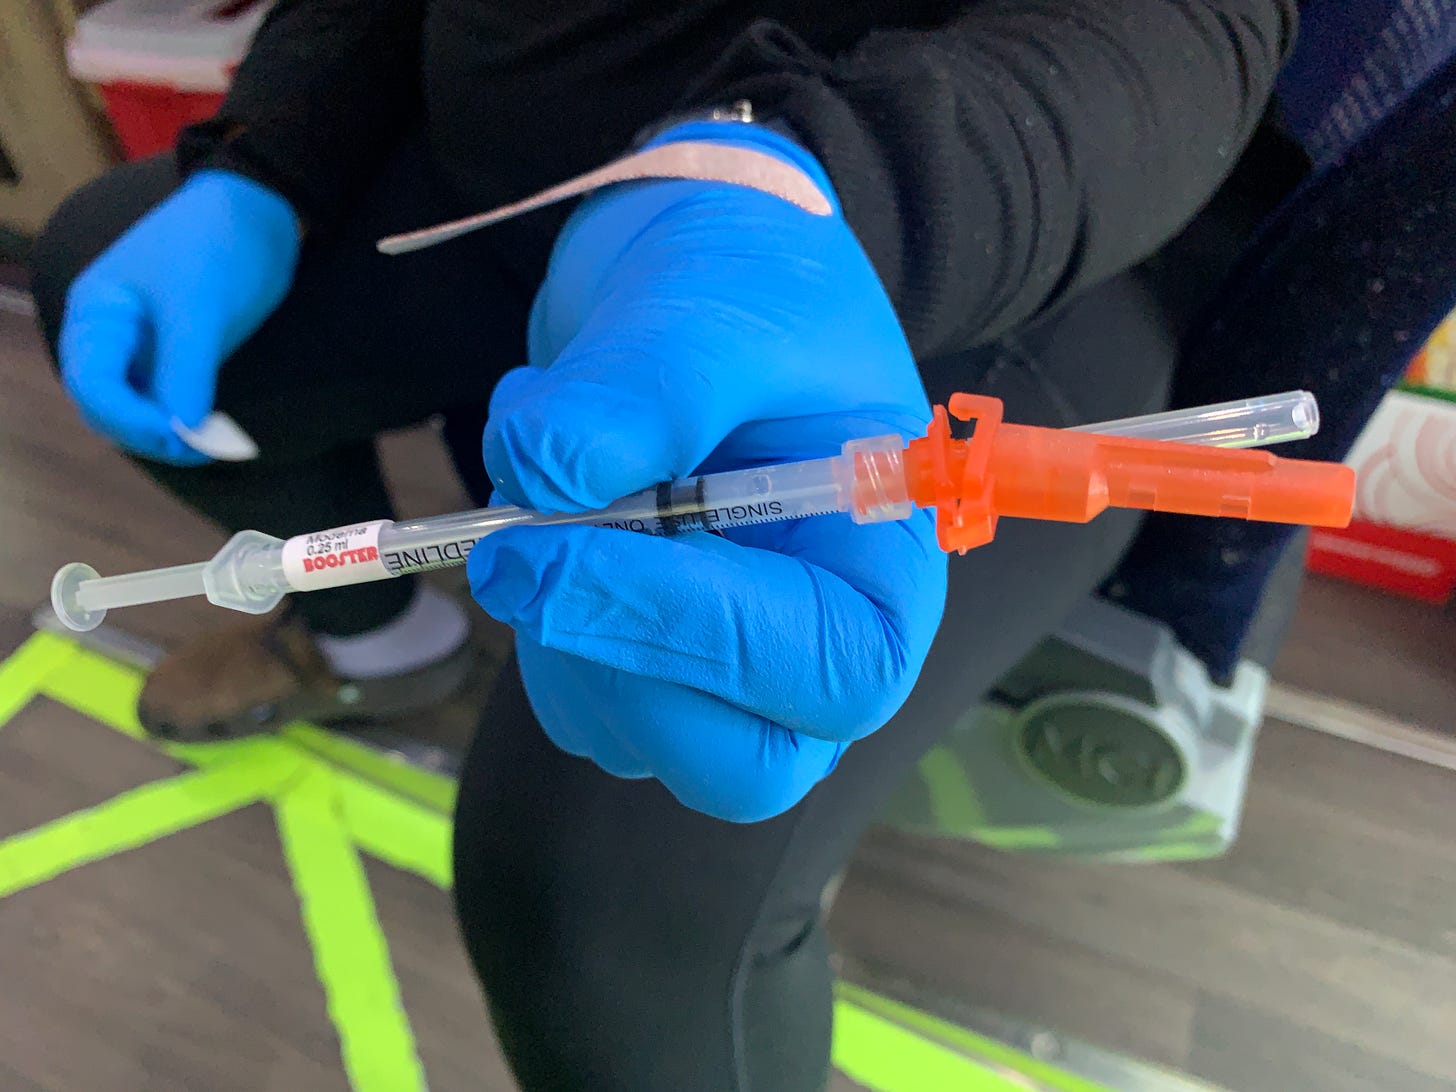 Syringe with a sticker saying "Booster" is held by a blue gloved hand. 